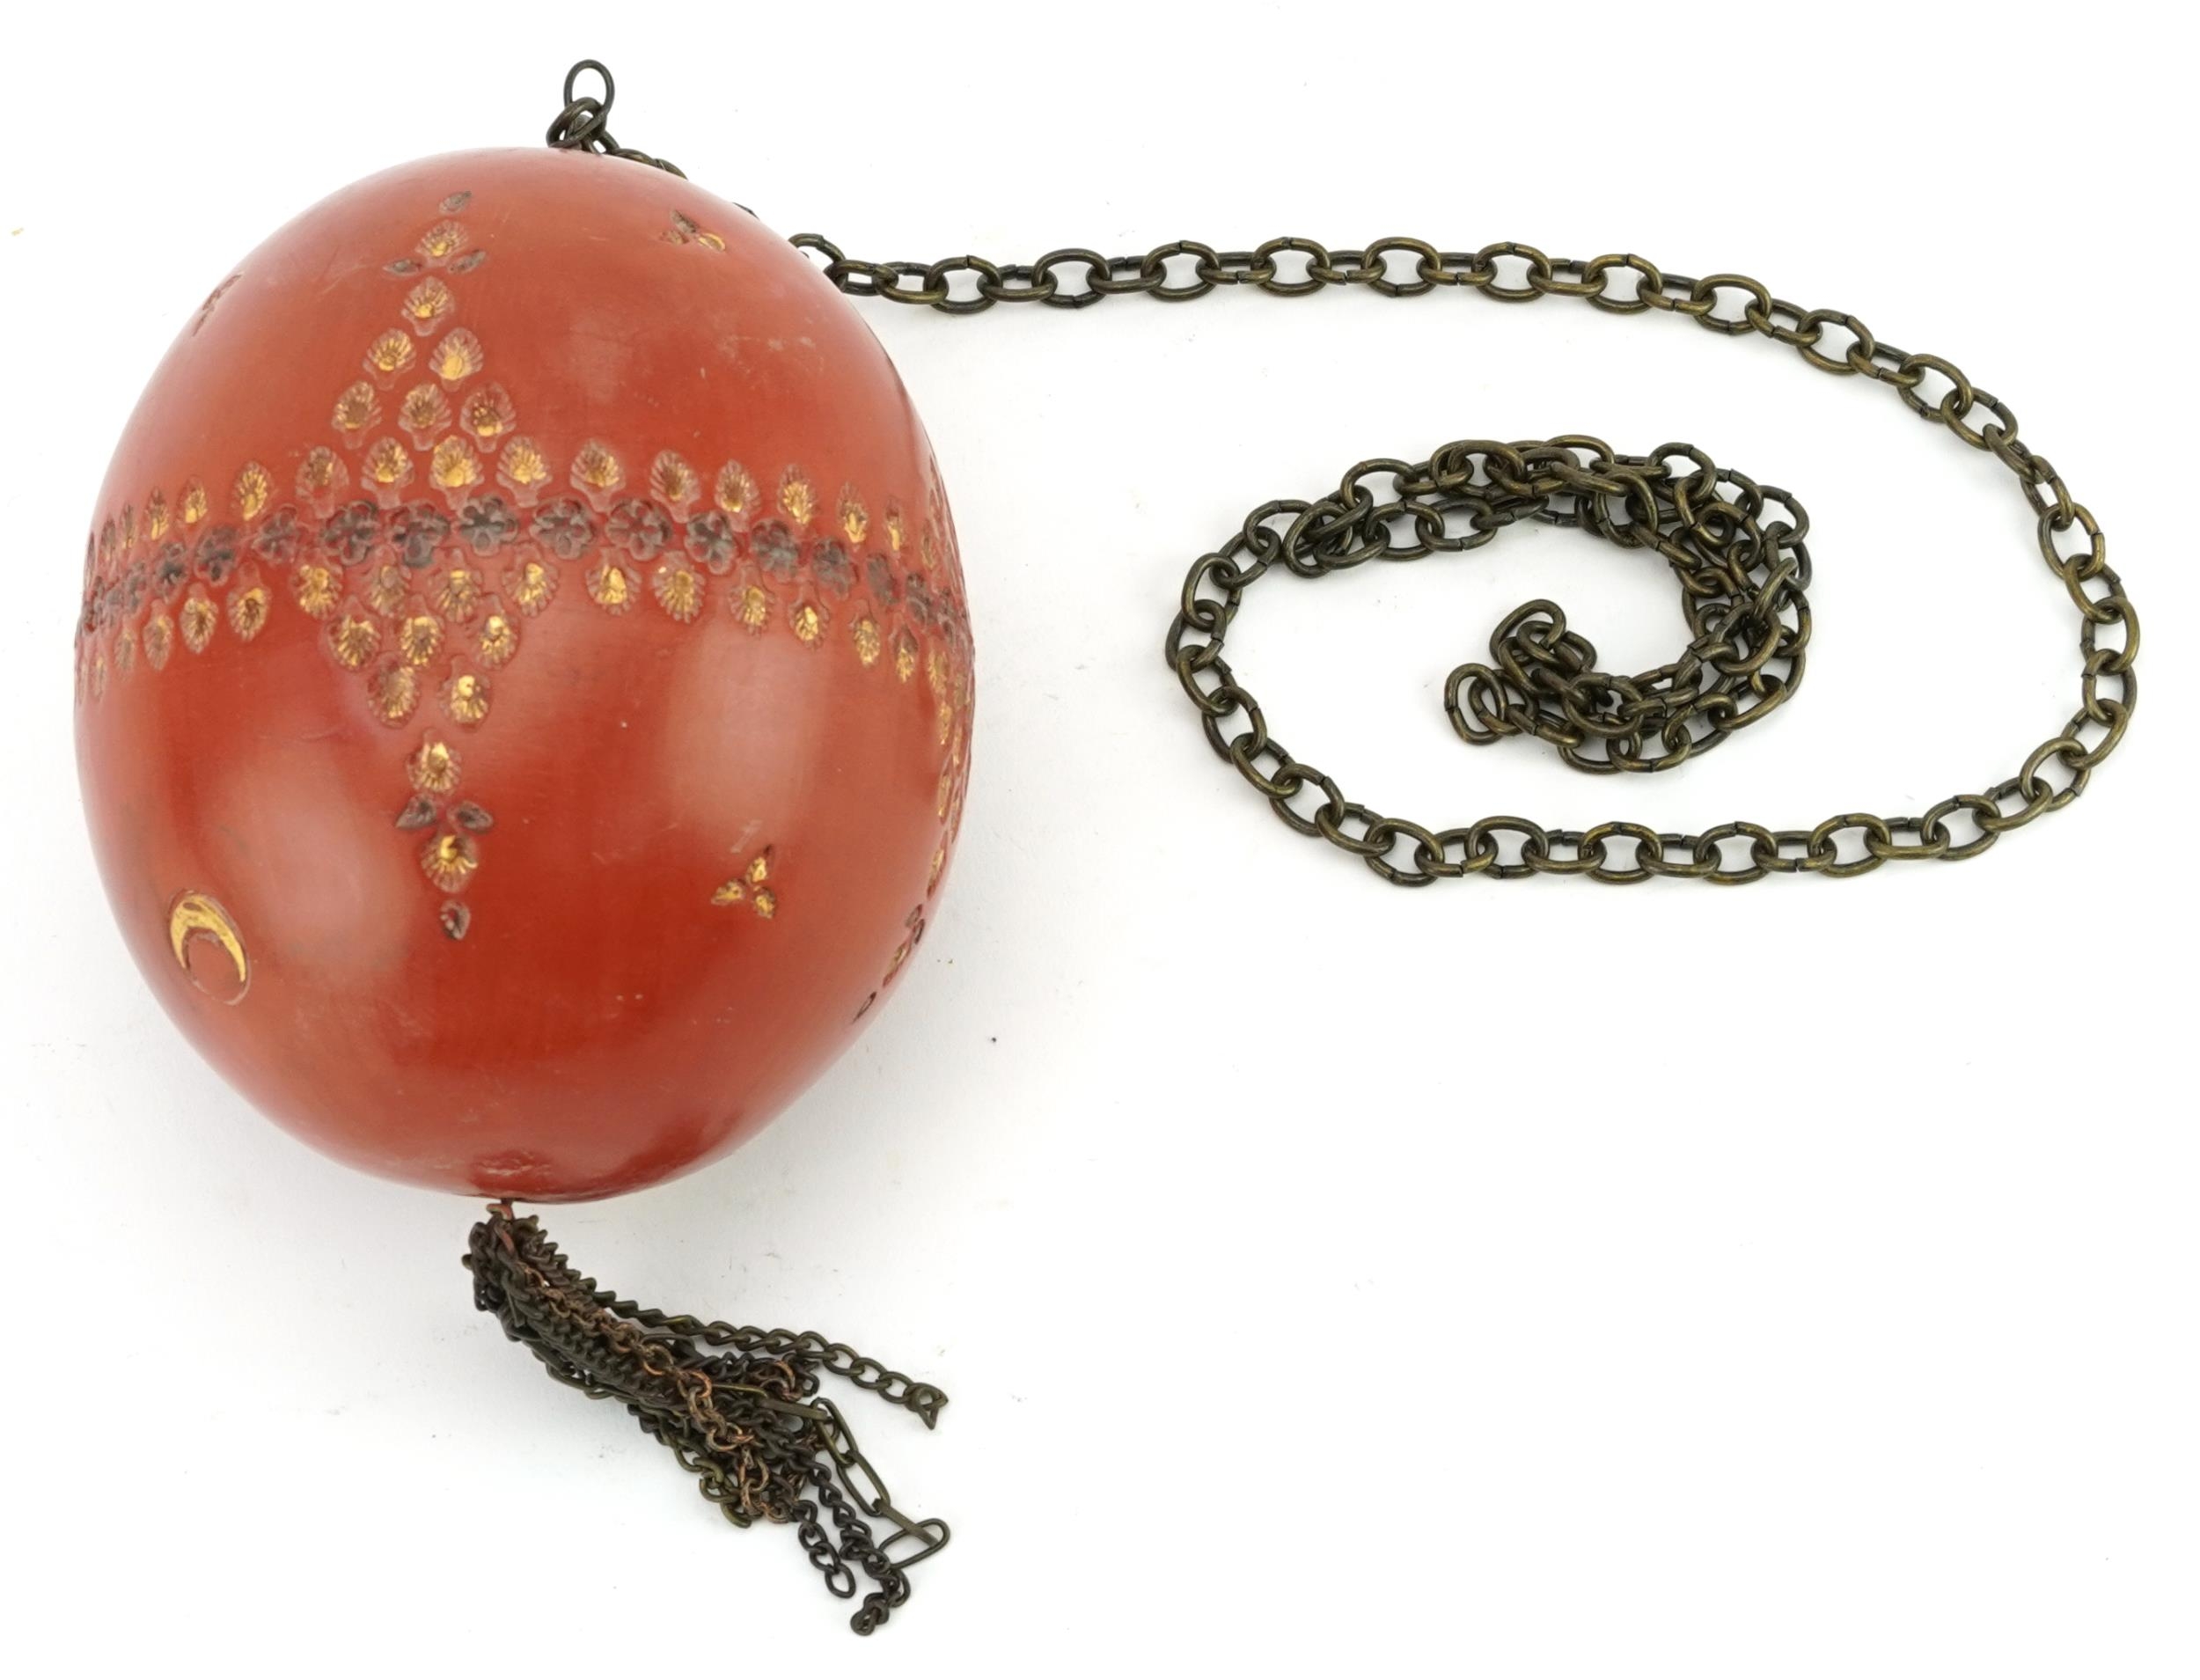 Turkish Ottoman Tophane hanging ball, 13.5cm high : For further information on this lot please visit - Image 2 of 3